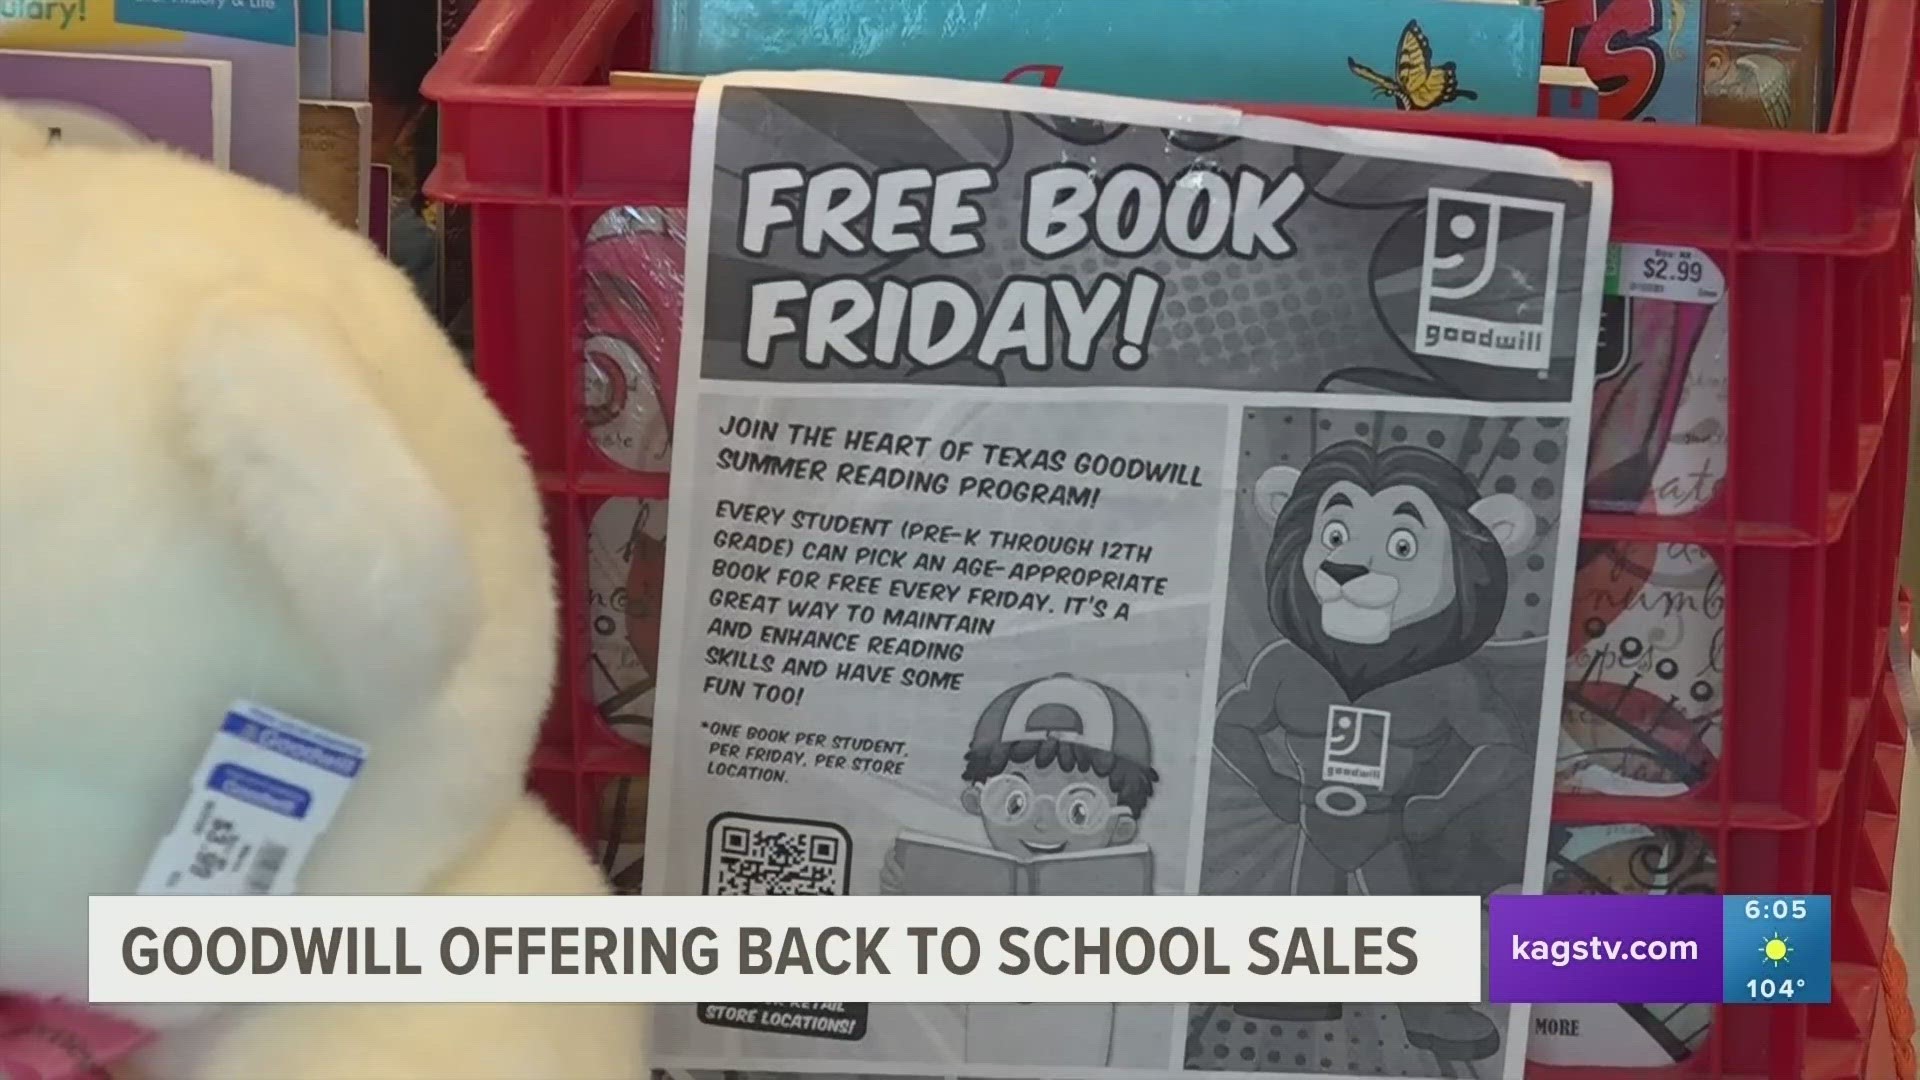 Back to school shopping got a little bit easier thanks to a new initiative from Goodwill.